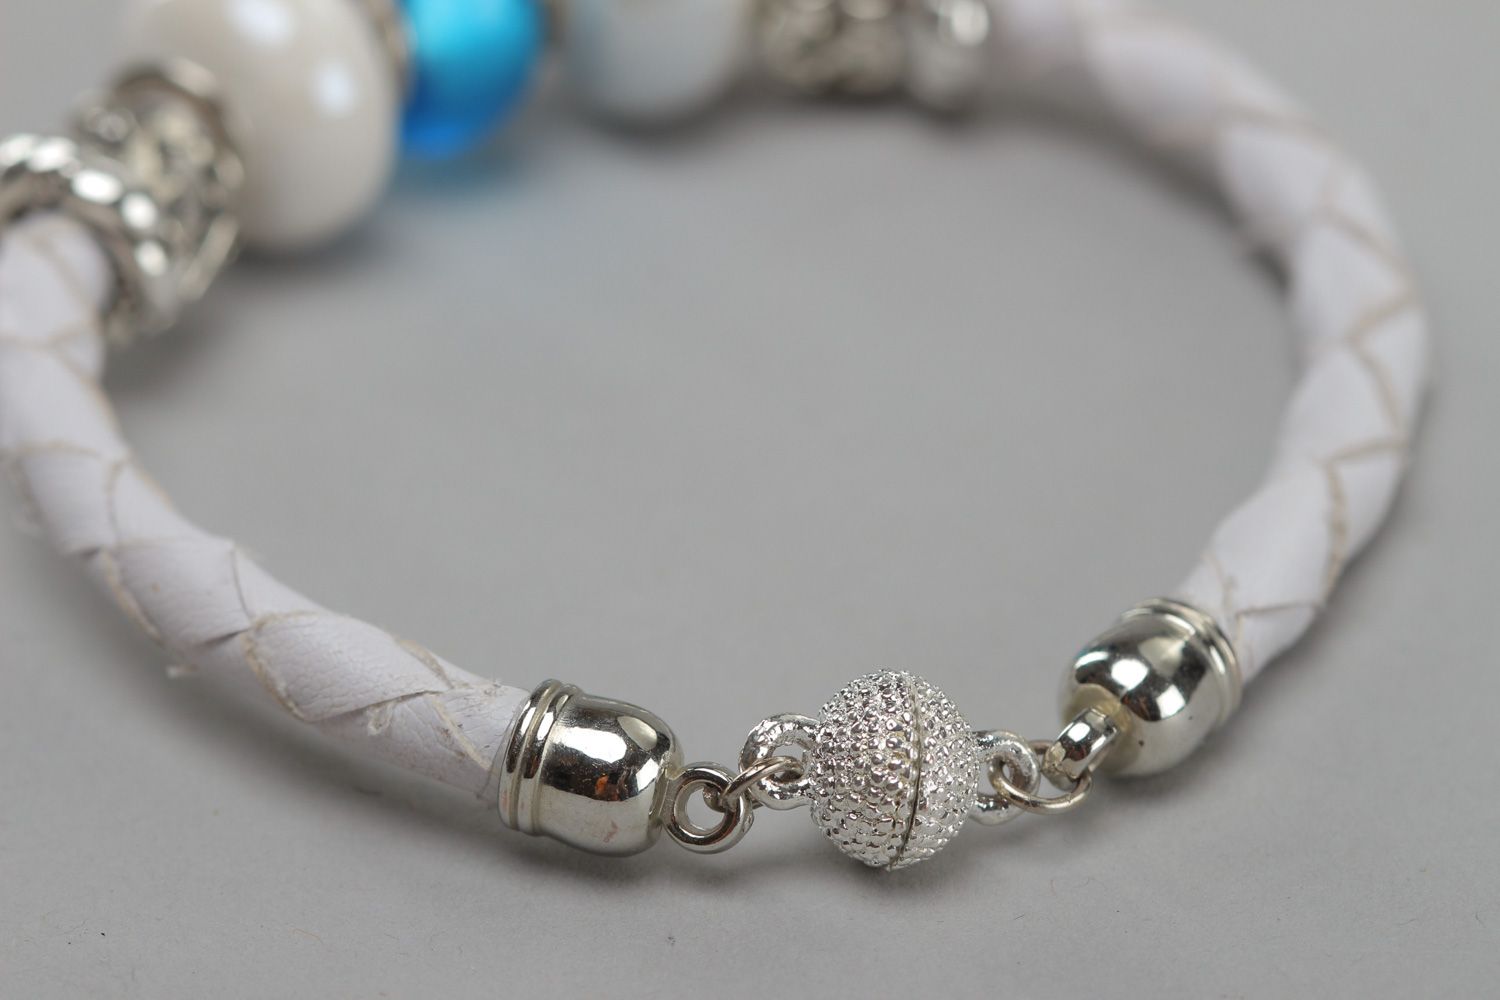 Tender handmade wrist bracelet woven of white faux leather with beads for women photo 4